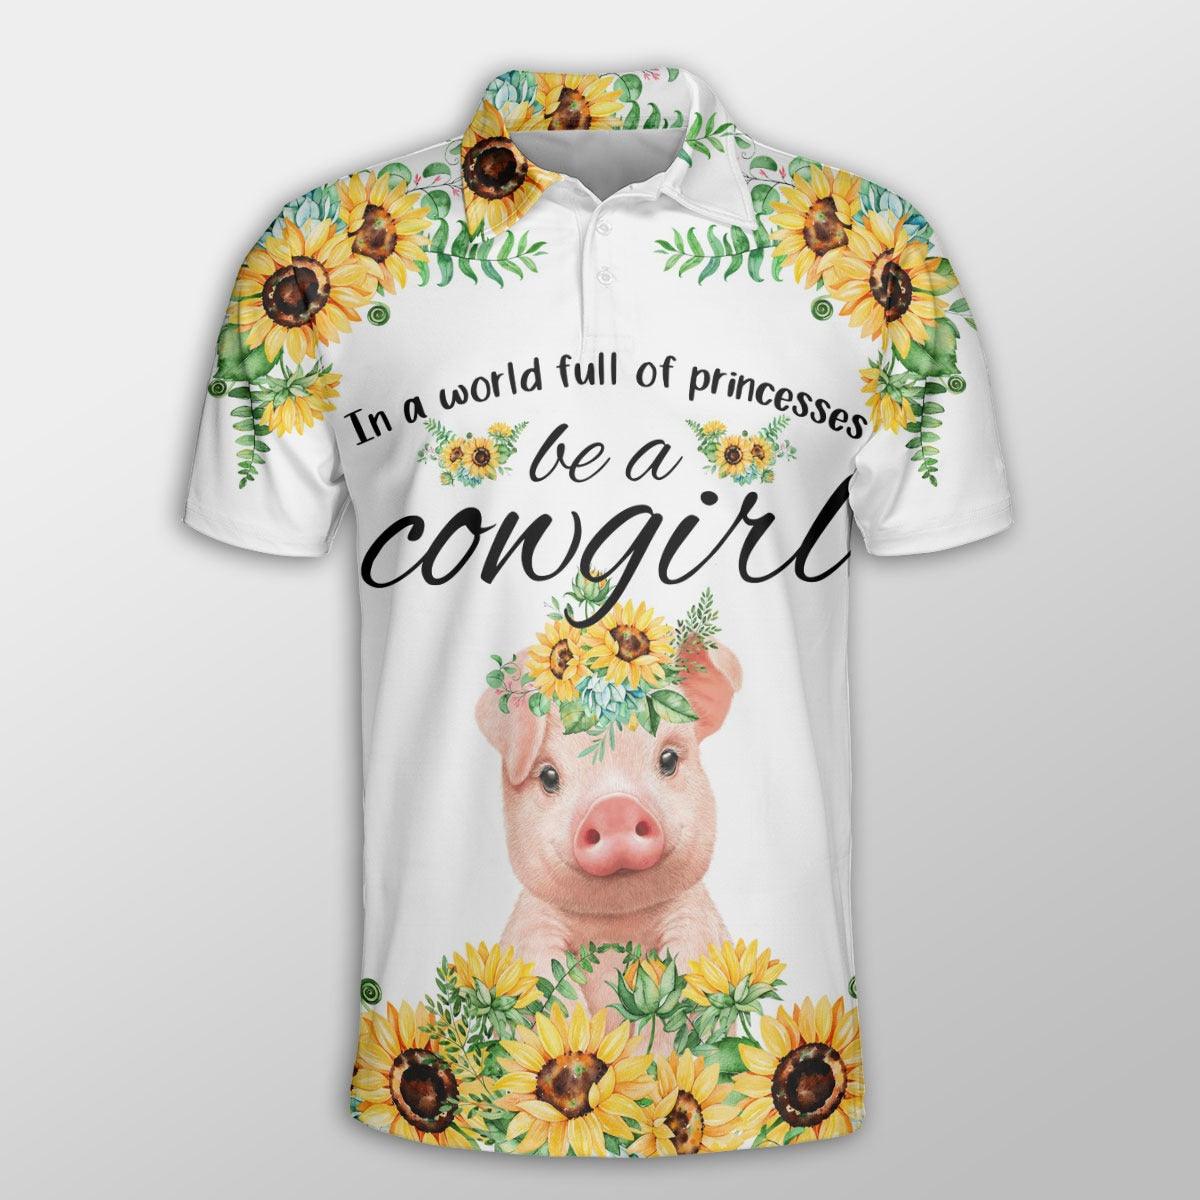 Pig Men Polo Shirt For Summer - Pig Sunflower Be A Cowgirl Pattern Button Shirt For Men - Perfect Gift For Pig Lovers, Cattle Lovers - Amzanimalsgift